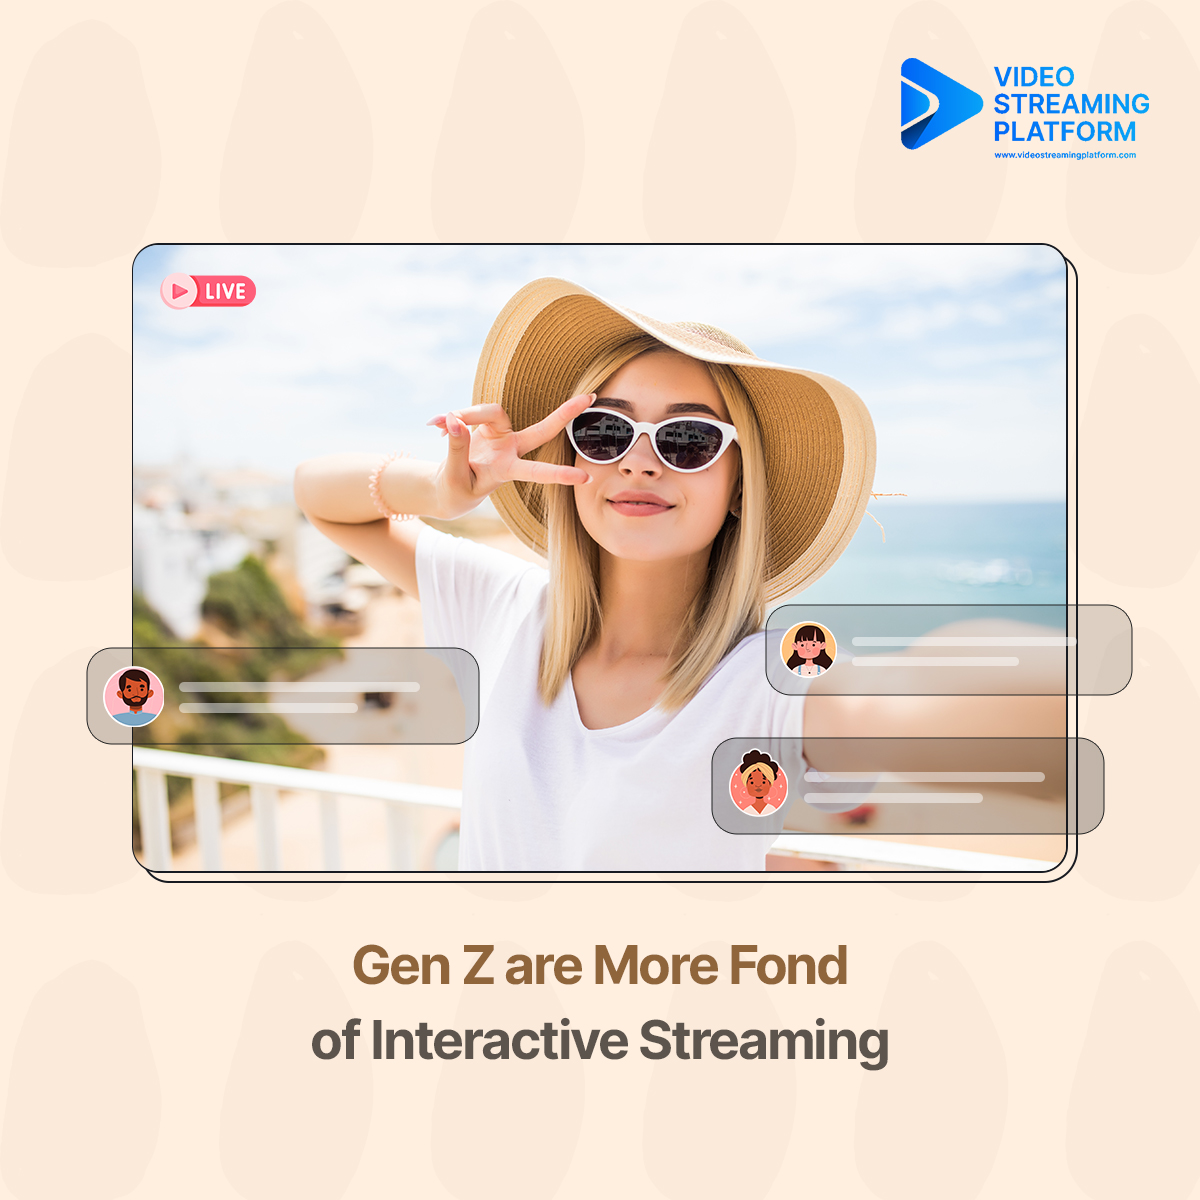 Interactive live video includes live-streaming video where the audience can react with chat or emojis, and streamer(s) can interact with their audiences in real-time. 

#streaming #video #genZ #interactivestreaming #content #videostreaming #live #ondemandvideo